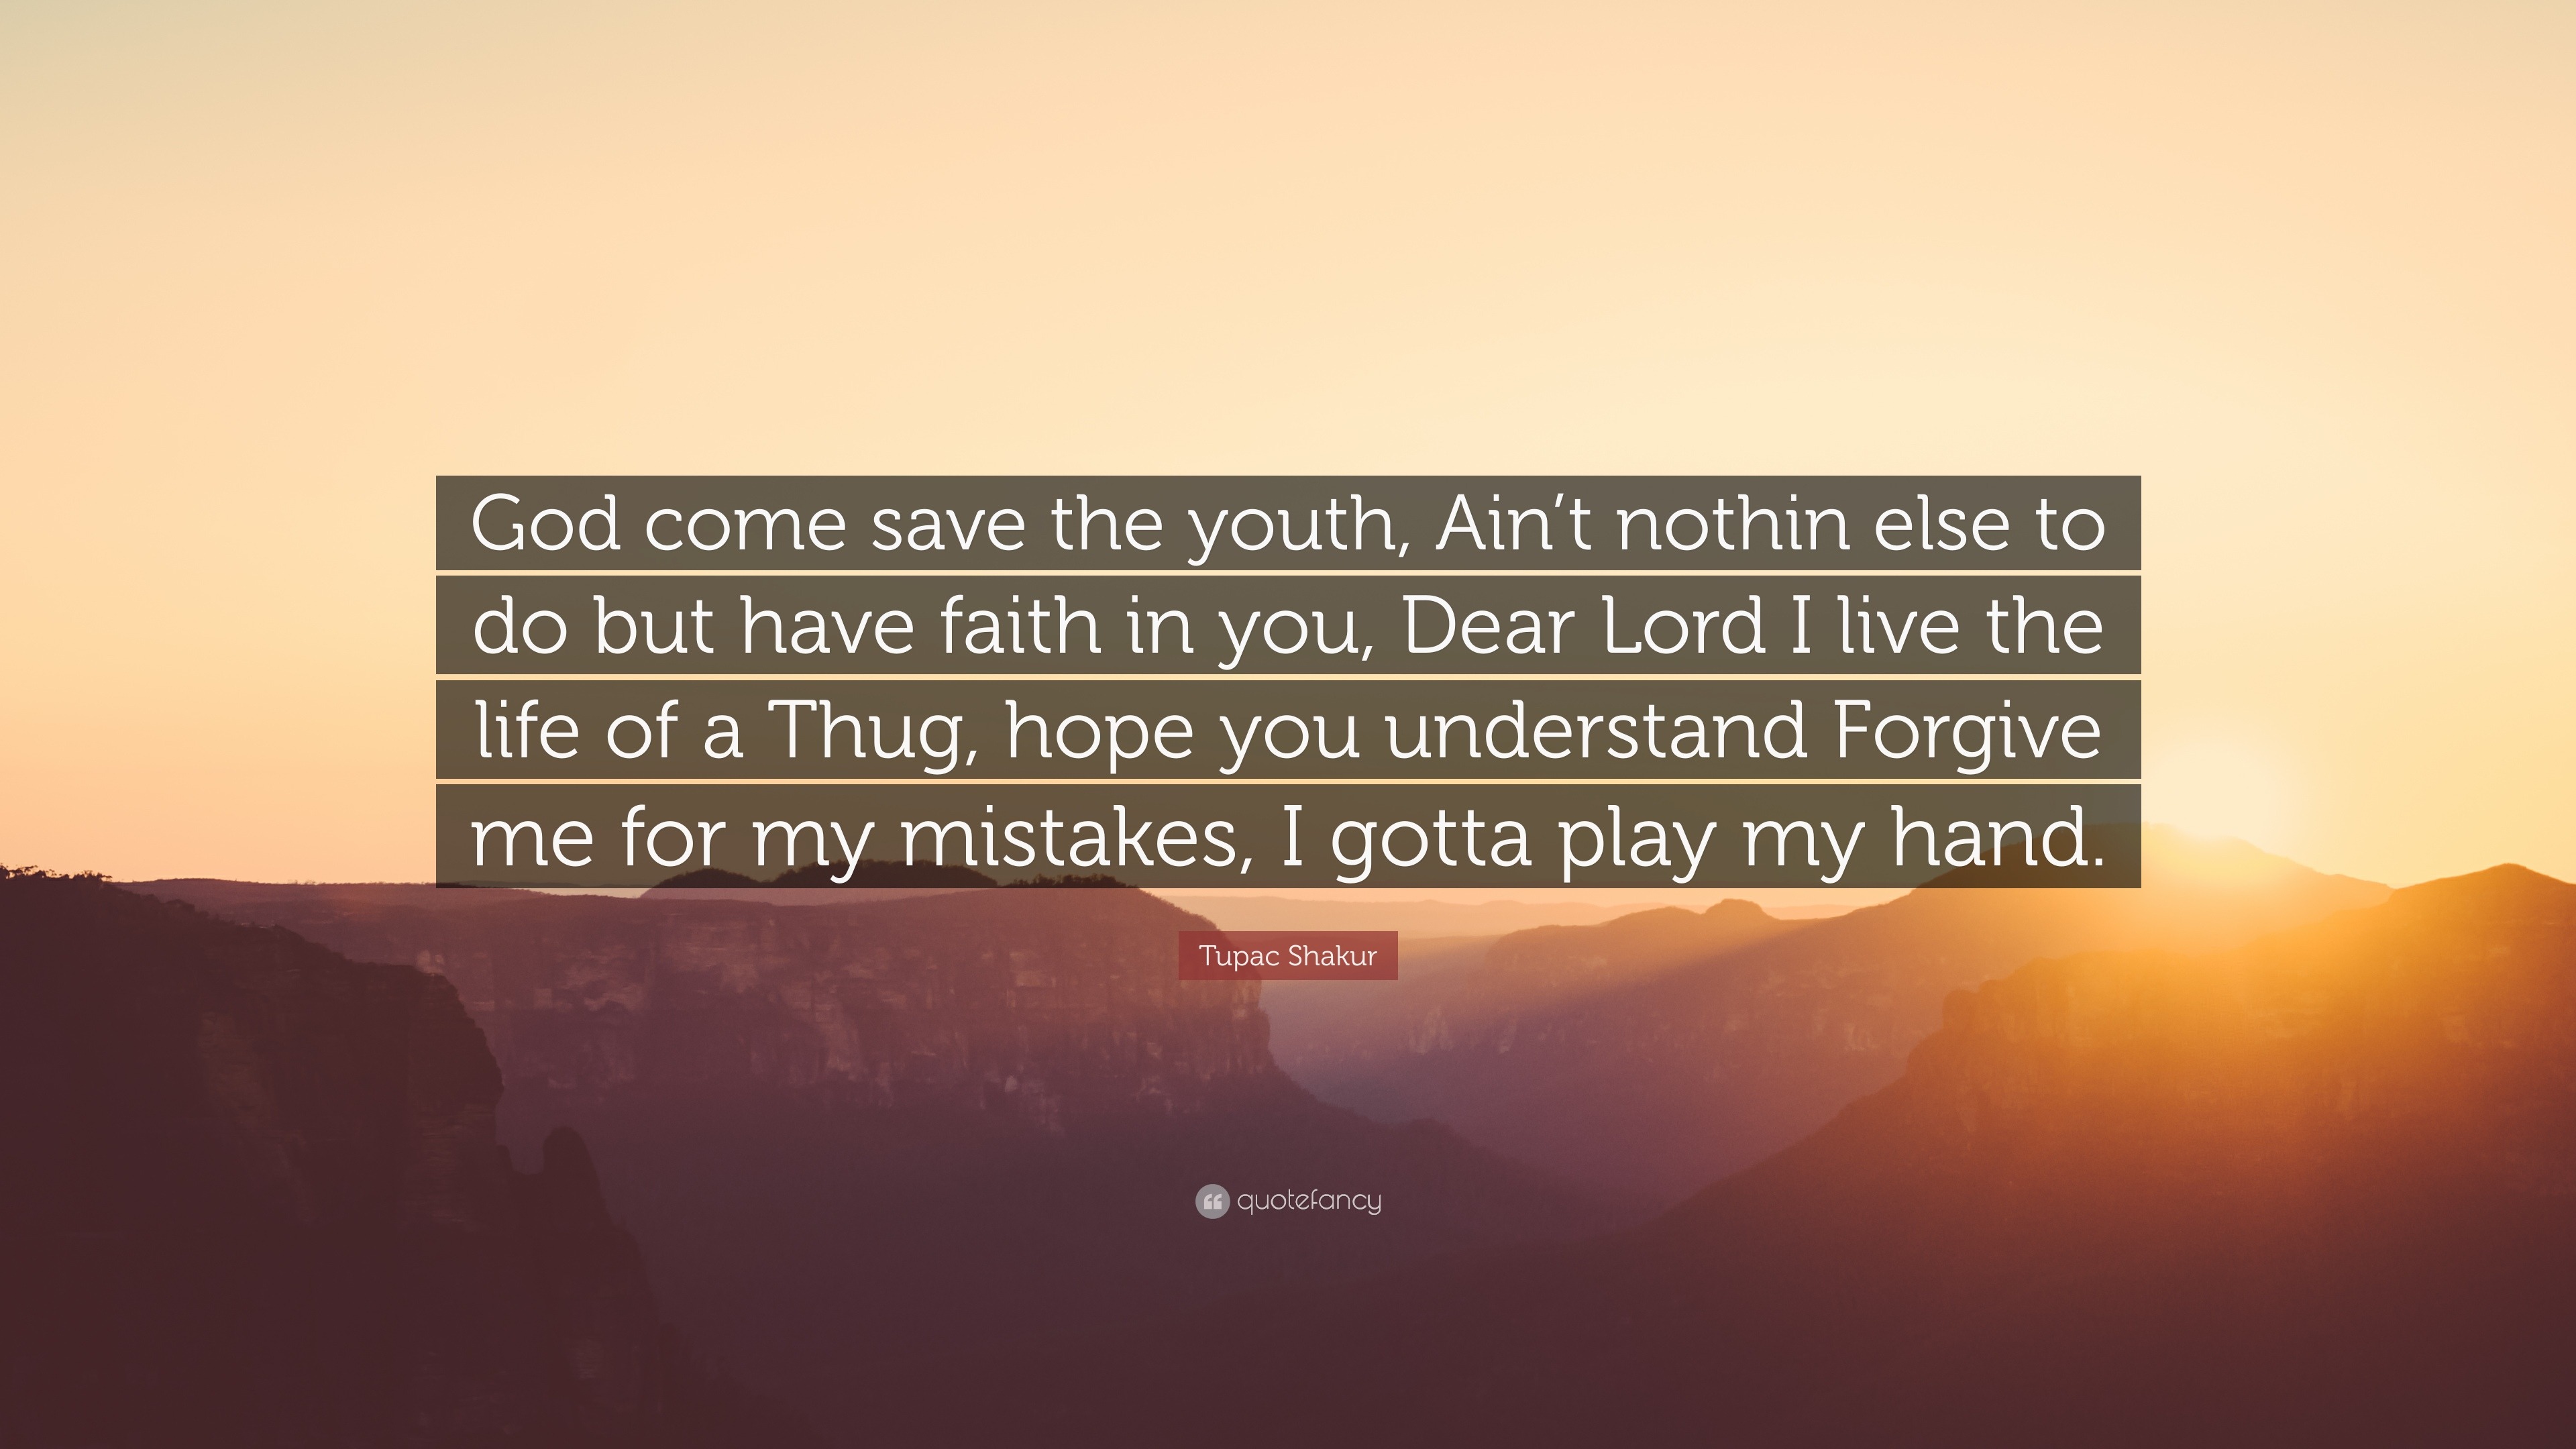 Tupac Shakur Quote: “God come save the youth, Ain't nothin else to do but  have faith in you, Dear Lord I live the life of a Thug, hope you un”